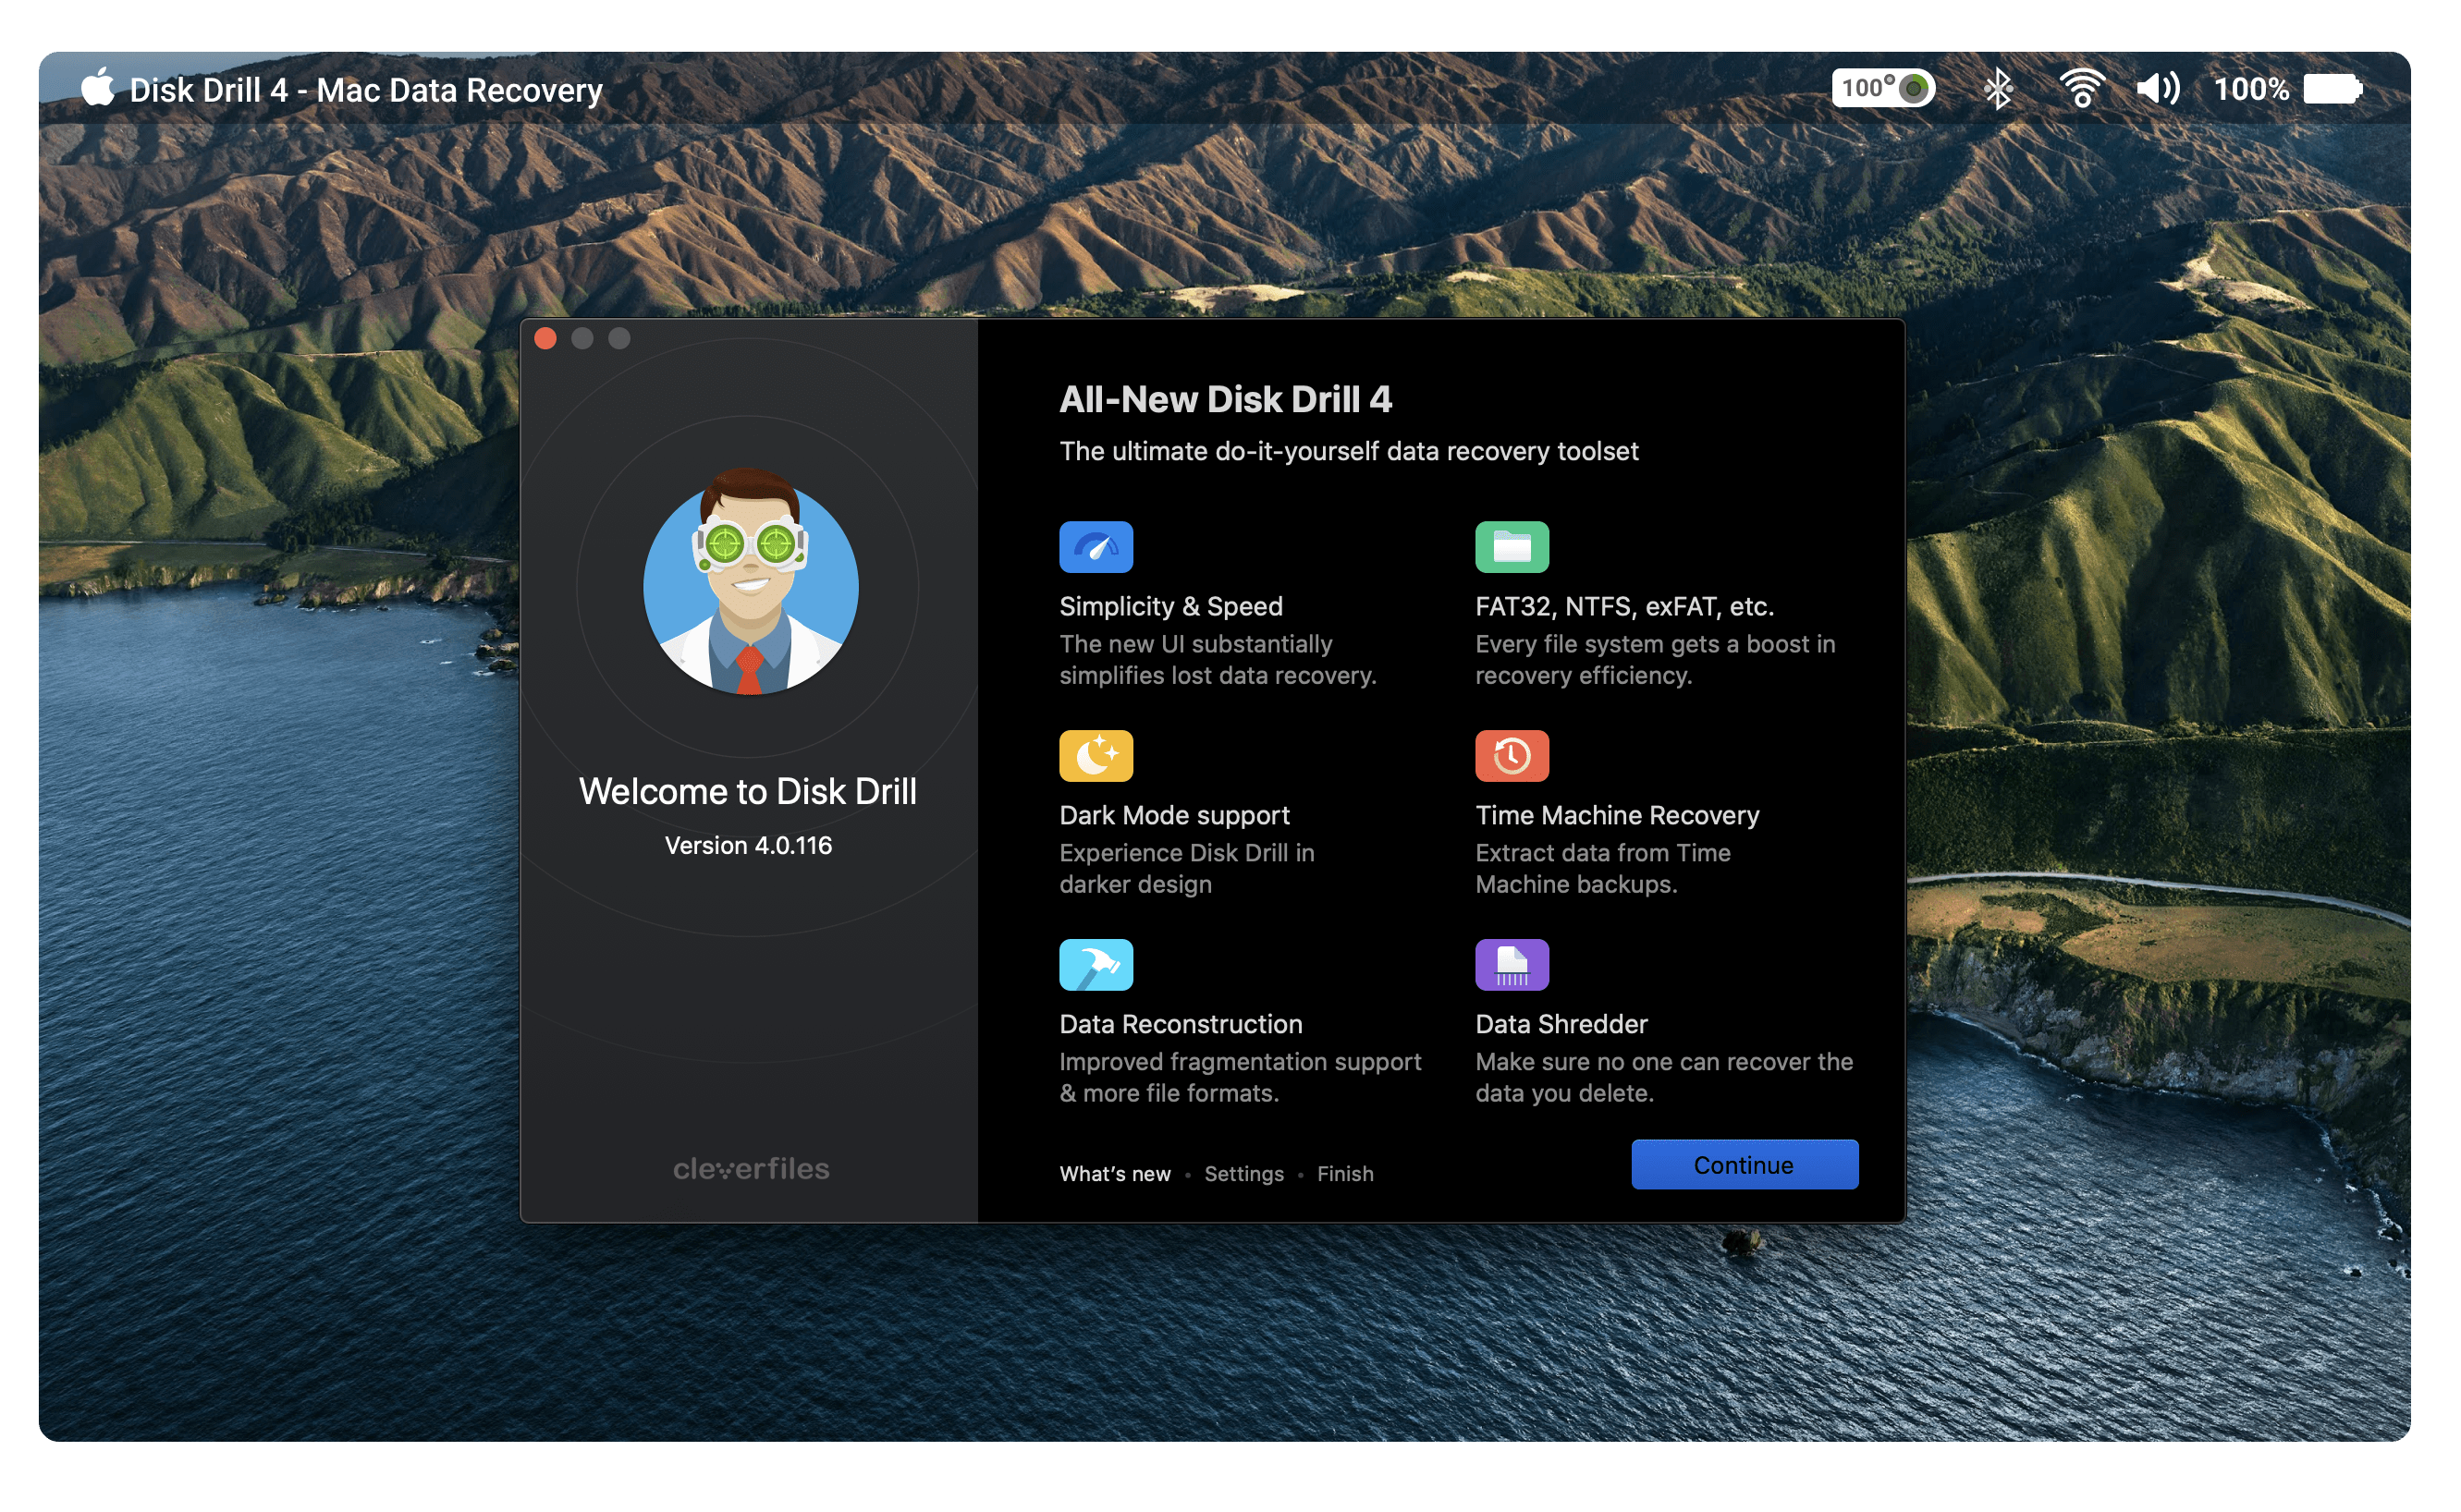 disk-drill-4-just-released-the-essential-app-for-macos-data-recovery